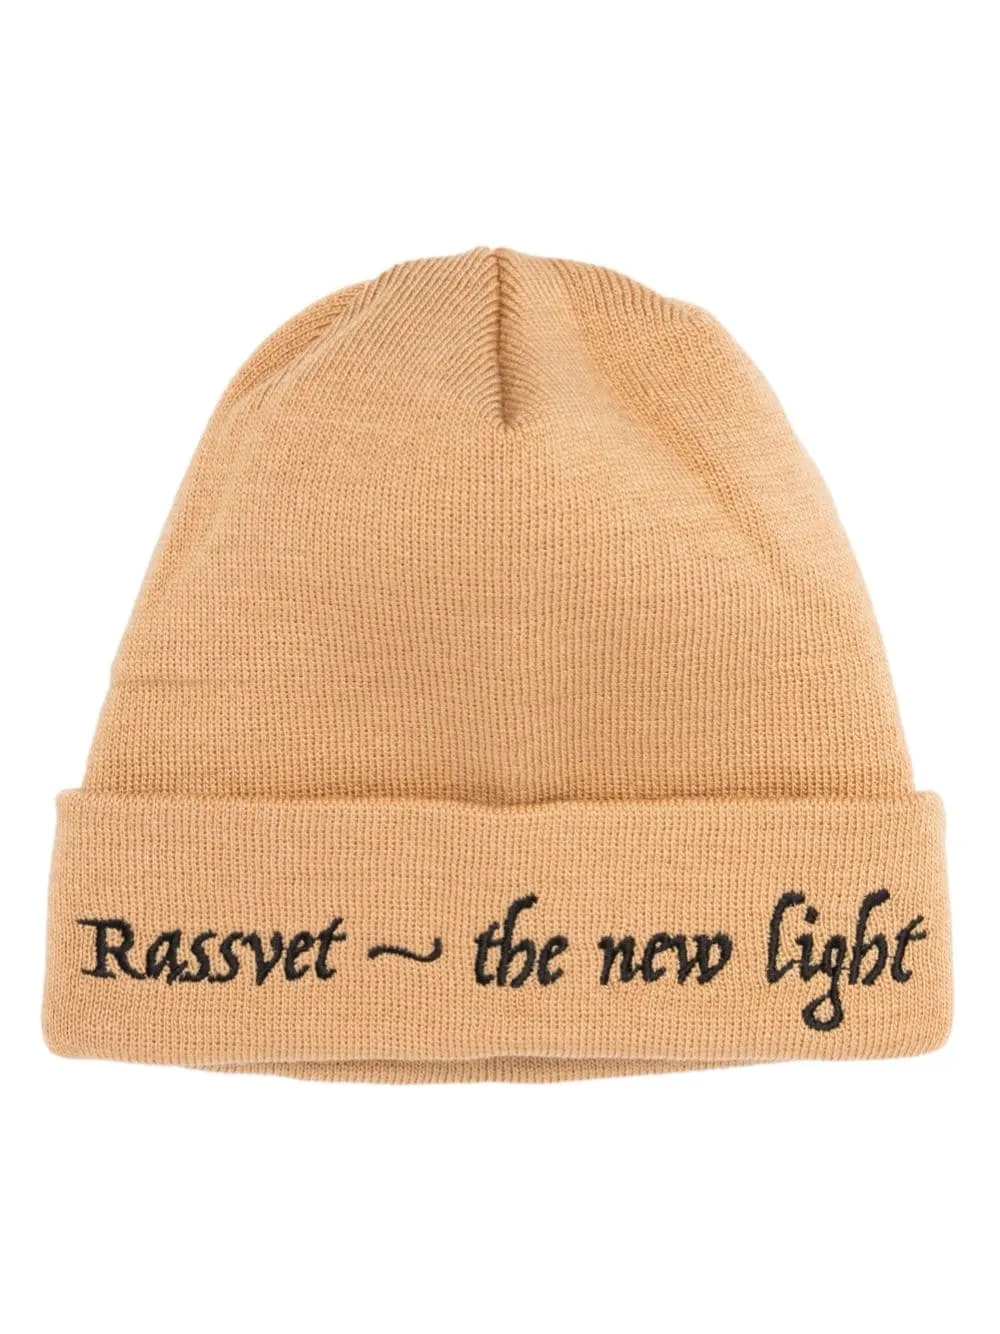 The New Light Beanie Knit Pacc13k002